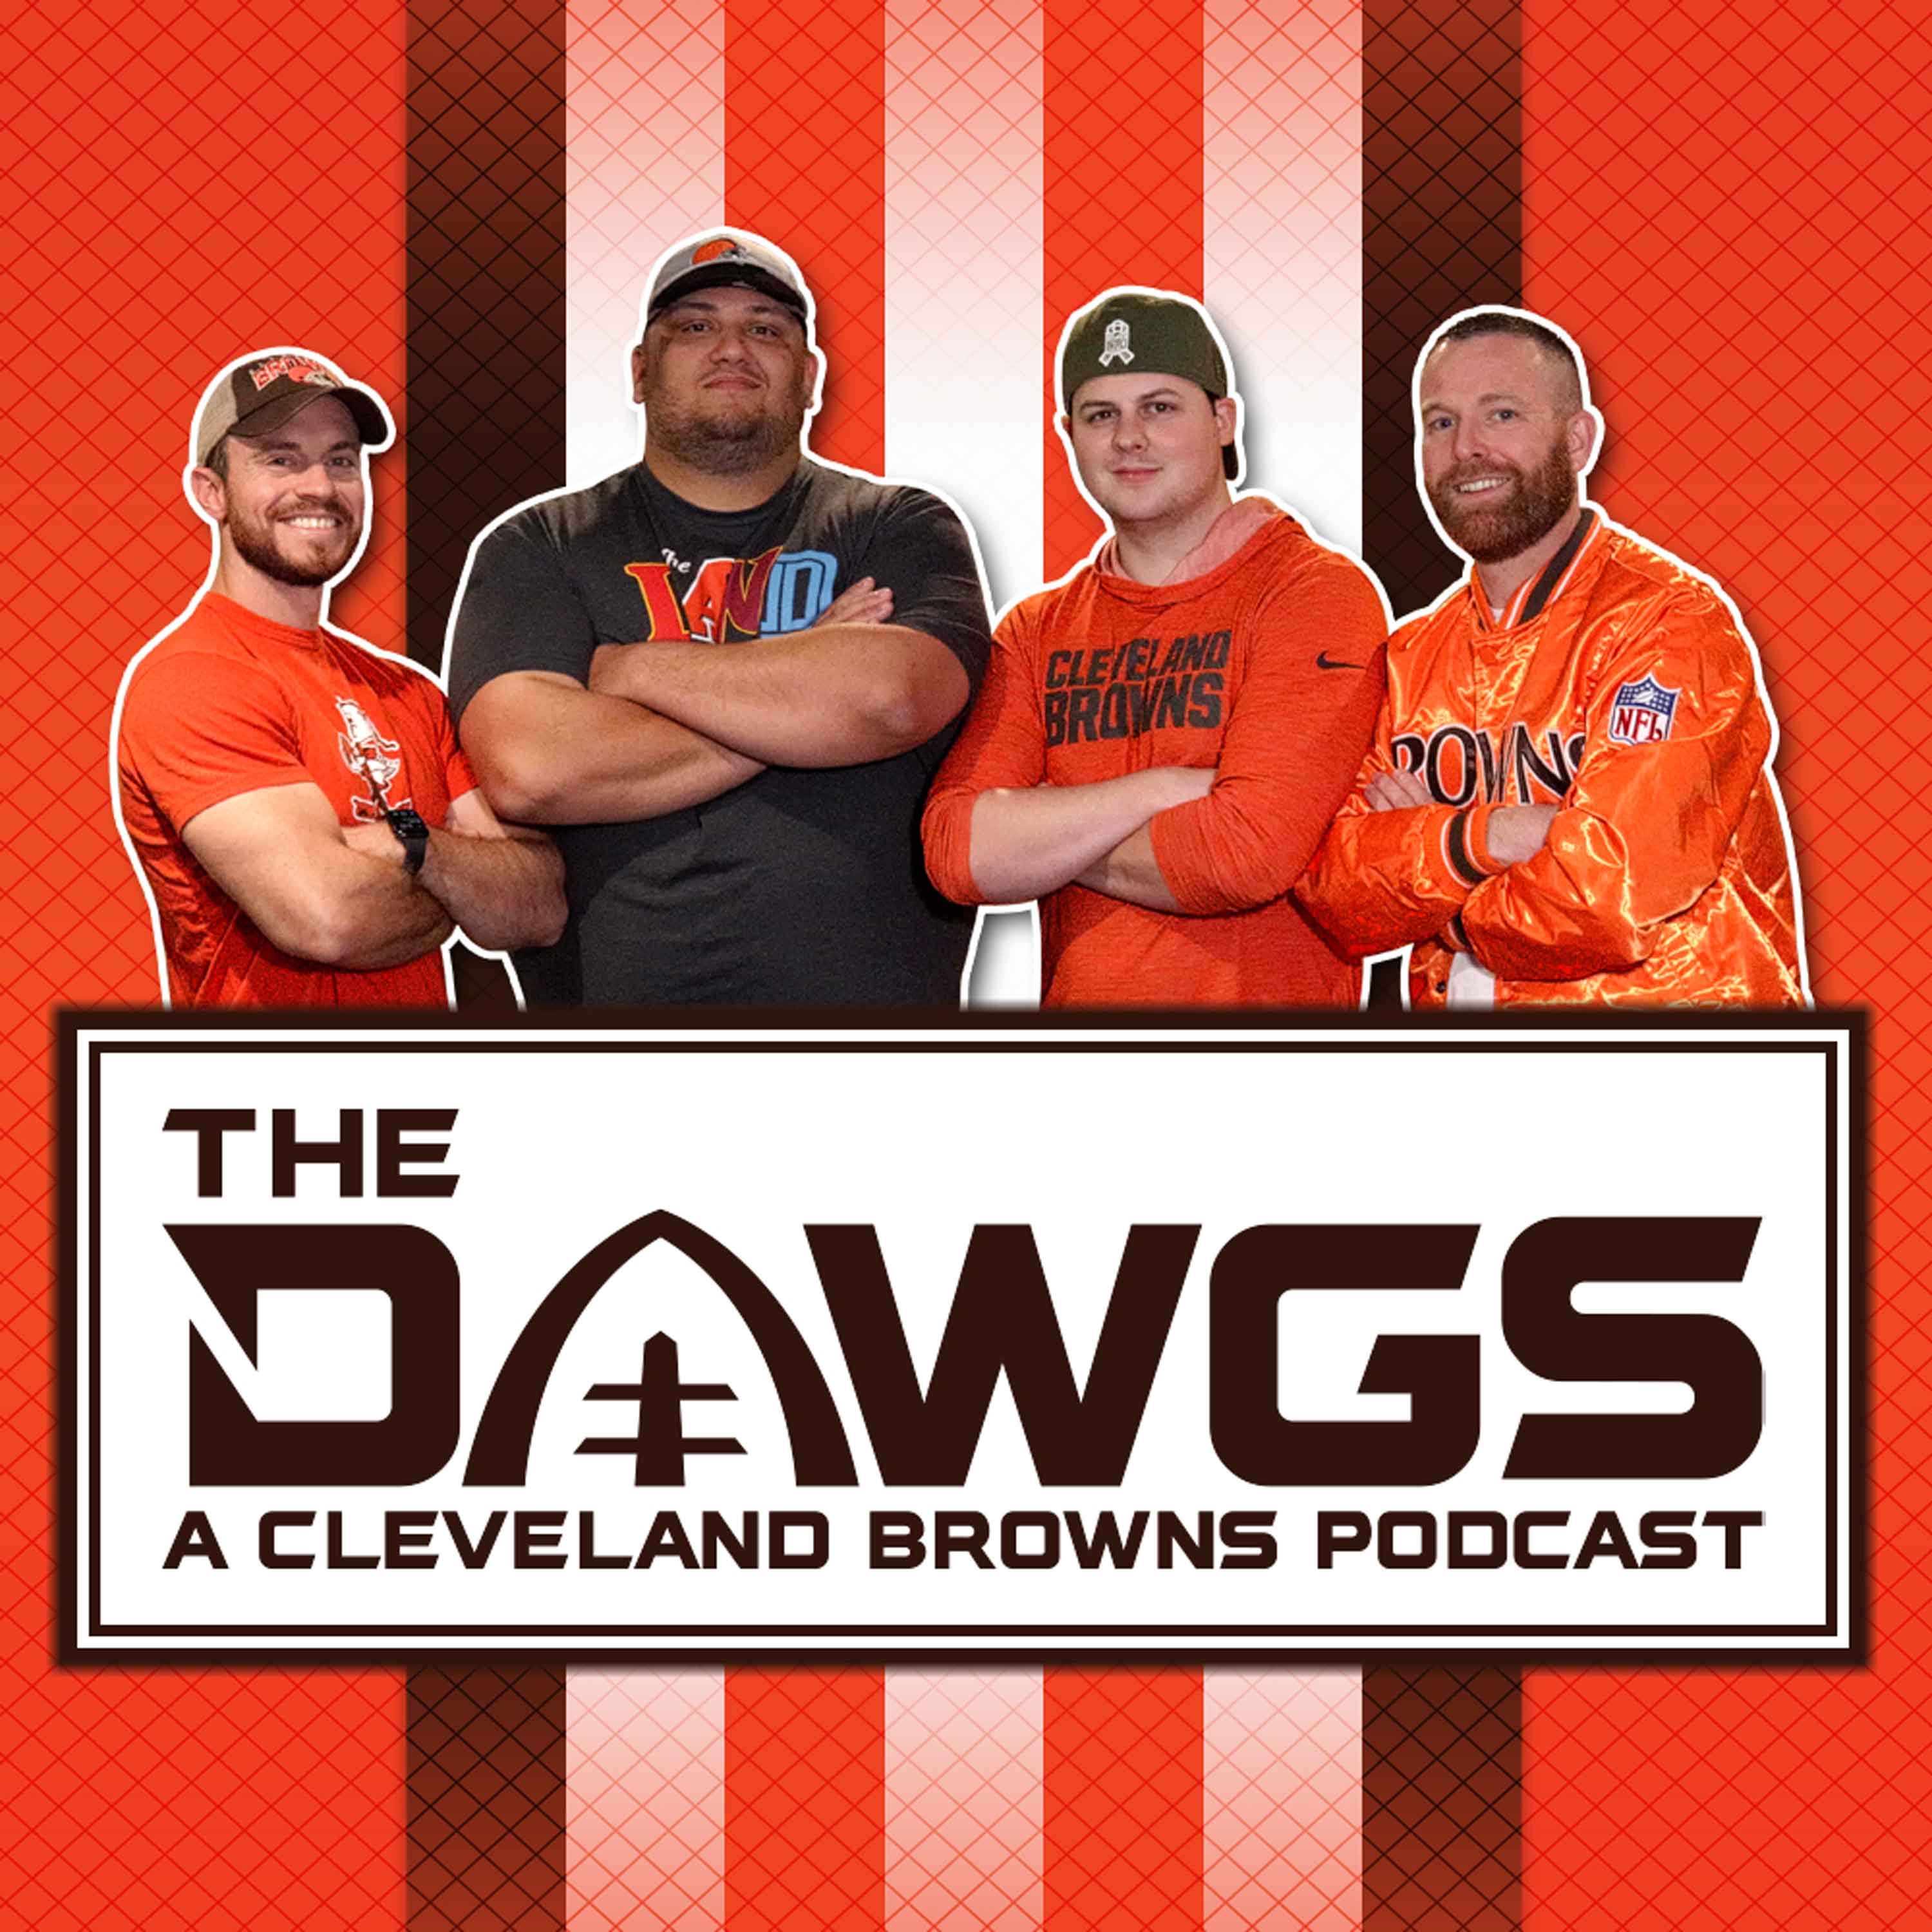 Week 5 Preview - Cleveland Browns vs Los Angeles Chargers  | The Dawgs - A Cleveland Browns Podcast - October 6, 2022